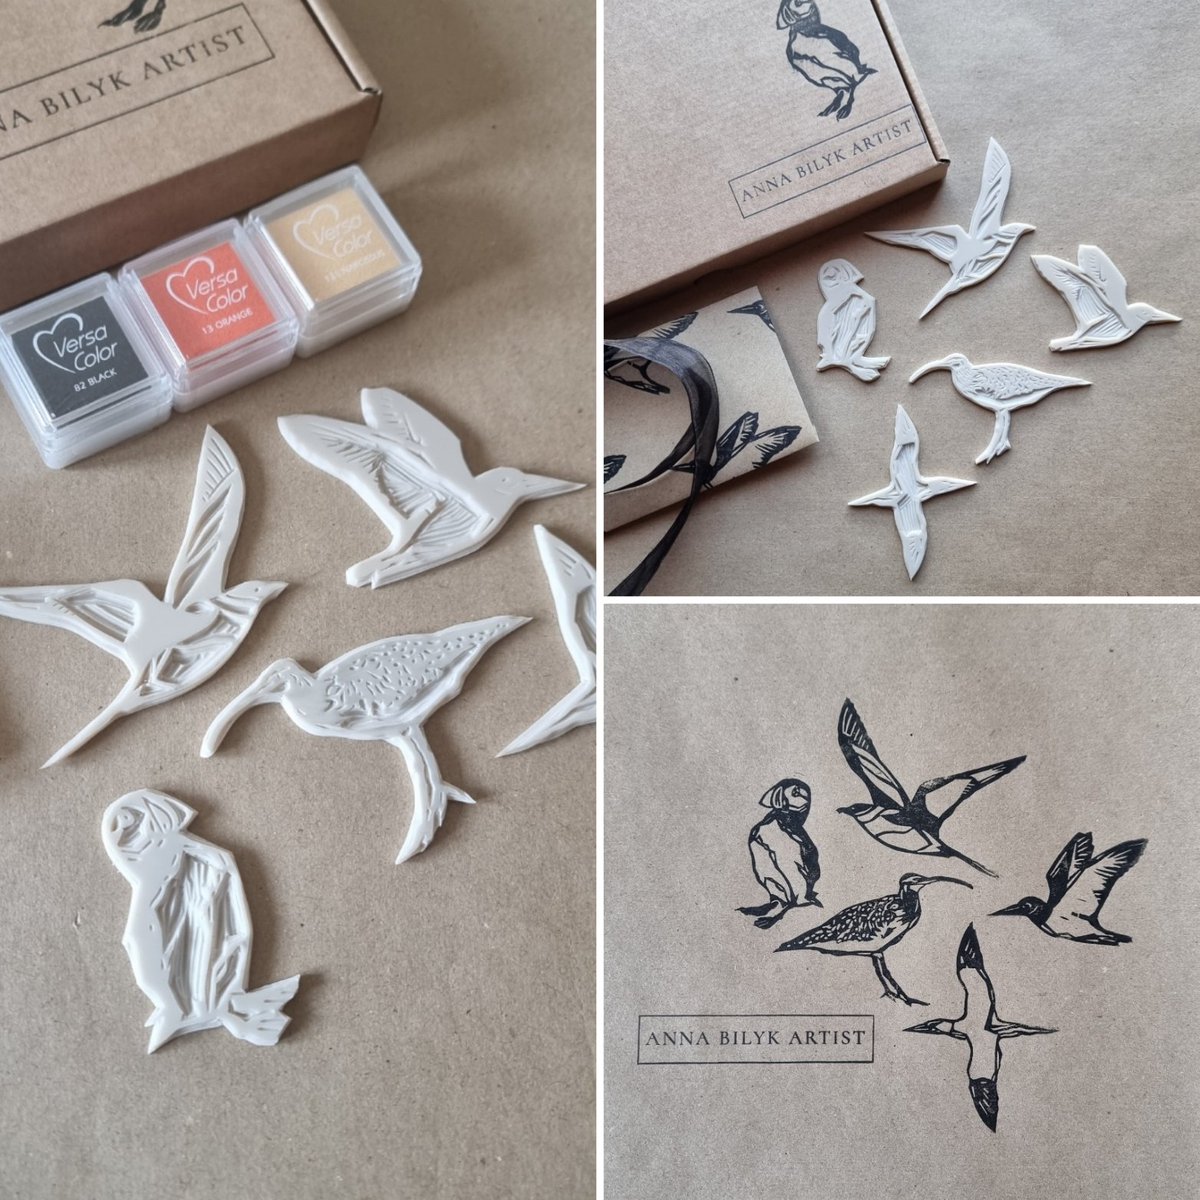 Seabirds Stamp Kits contain 5 x hand carved rubber lino stamps & 3 mini stamp pads - perfect for scrapbooking, journaling & general craft fun !!! Avaliable in shop : thebritishcrafthouse.co.uk/product/seabir… @BritishCrafting #tbch #Stamps #craft #shopindie #handmadehour #stamp #crafting